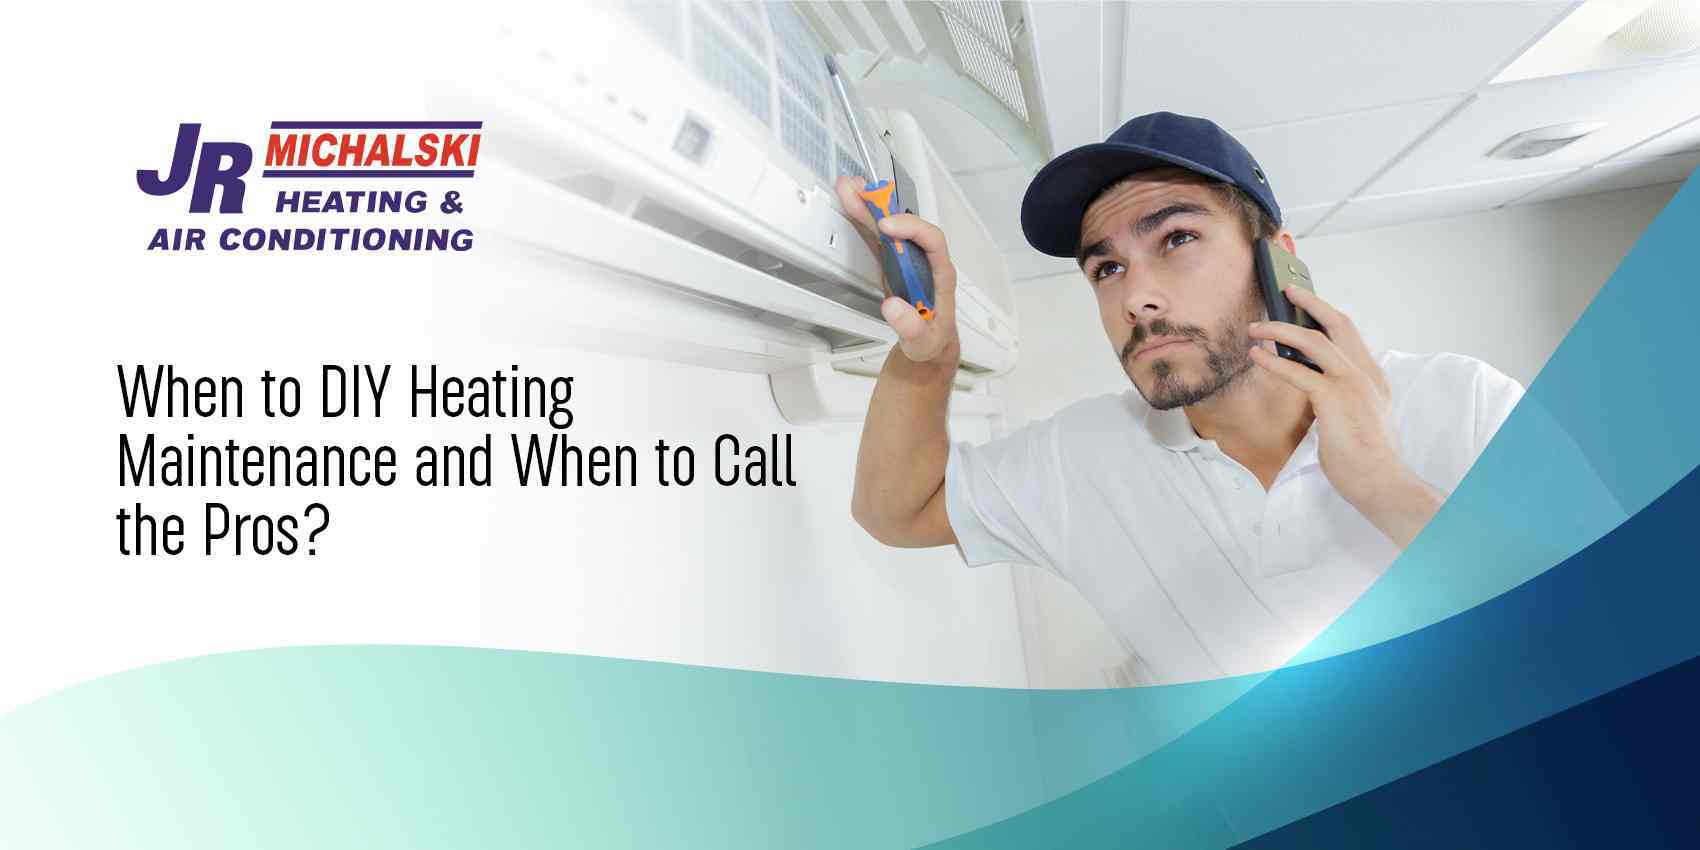 When to DIY Heating Maintenance and When to Call the Pros?